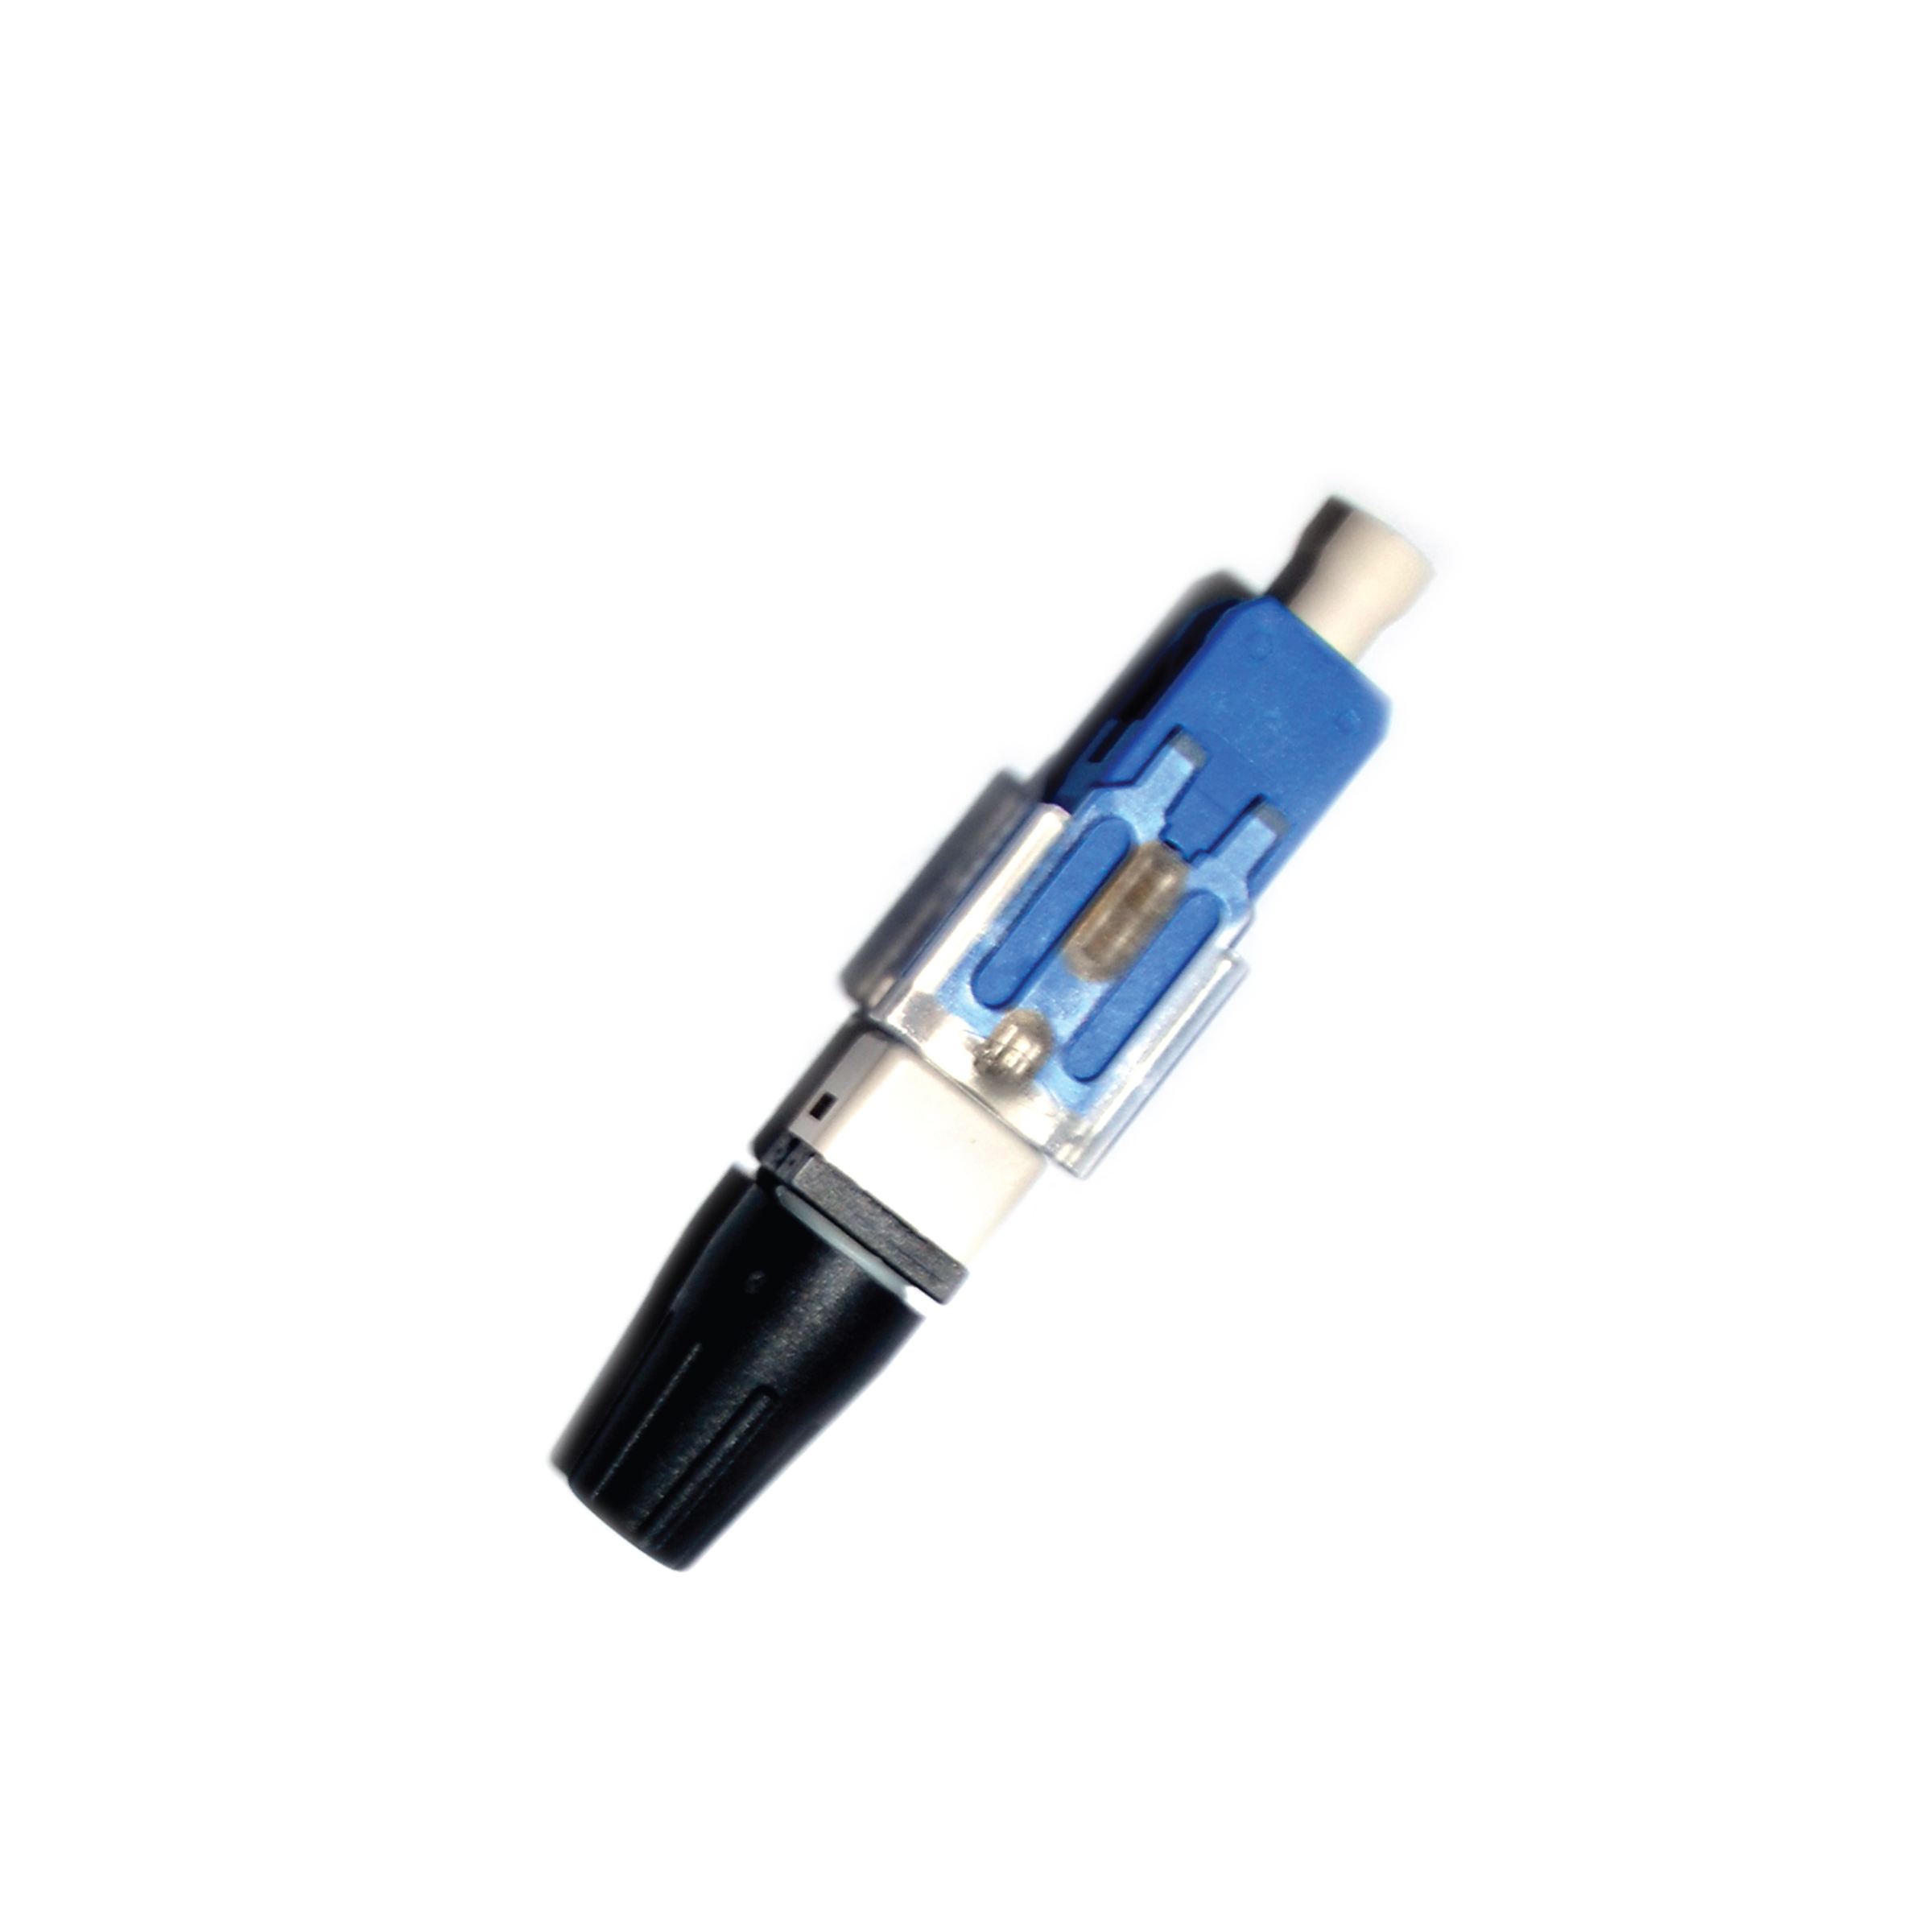 Fiber_Ftth Management System_FIC Connector_FIC5 with roundboot.jpg